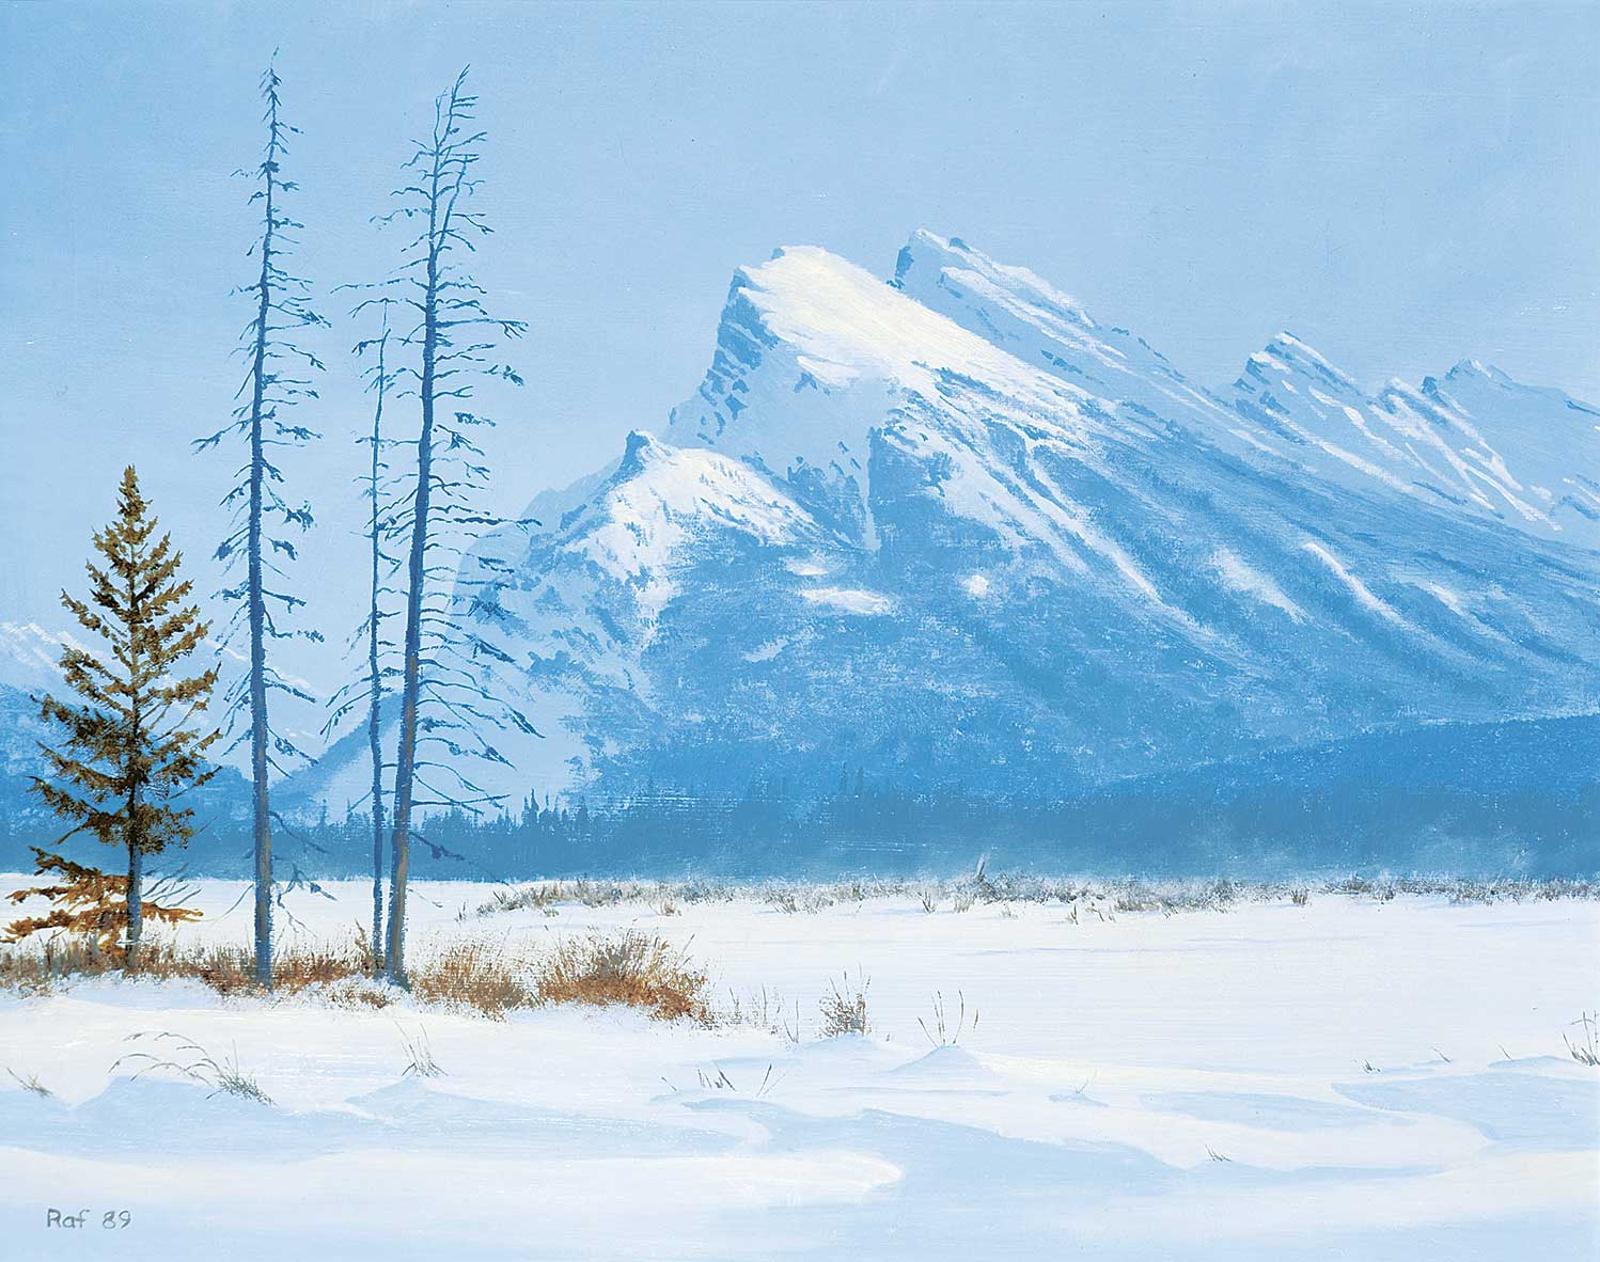 Ted Raftery (1938) - Mount Rundle